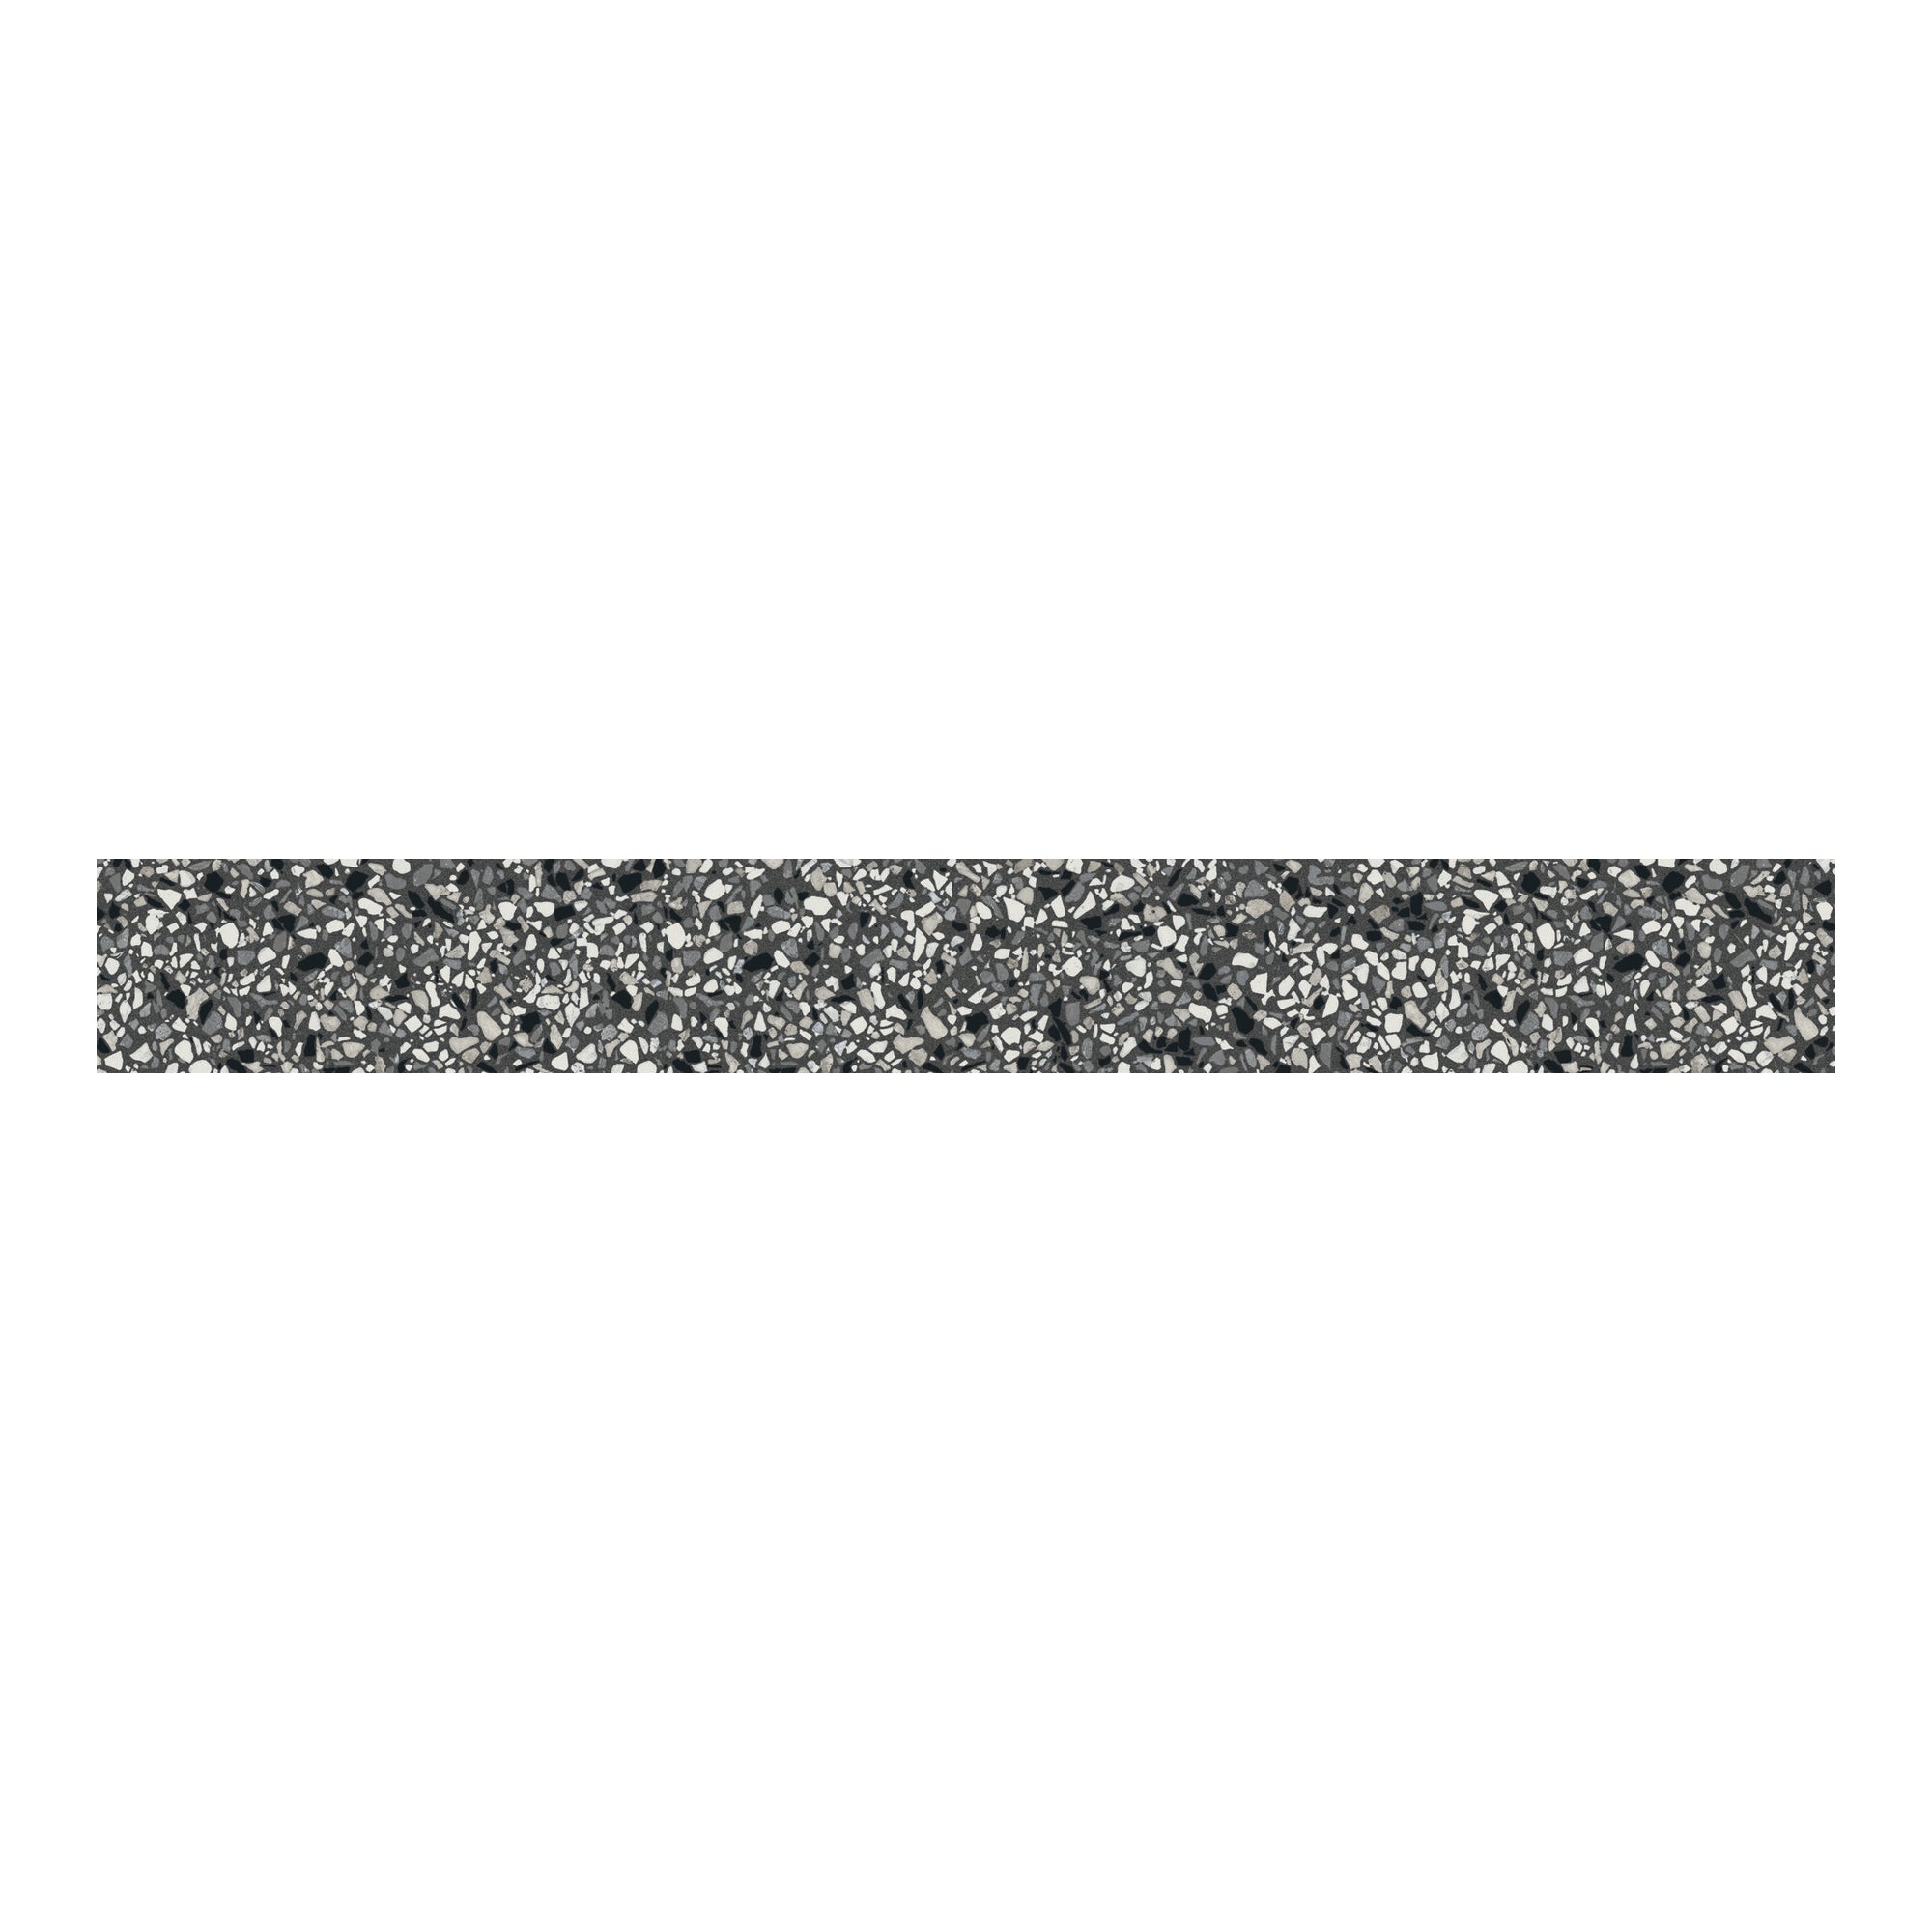 Daltile - Modernist 3 in. x 24 in. Colorbody Porcelain Bullnose - Knoll Charcoal